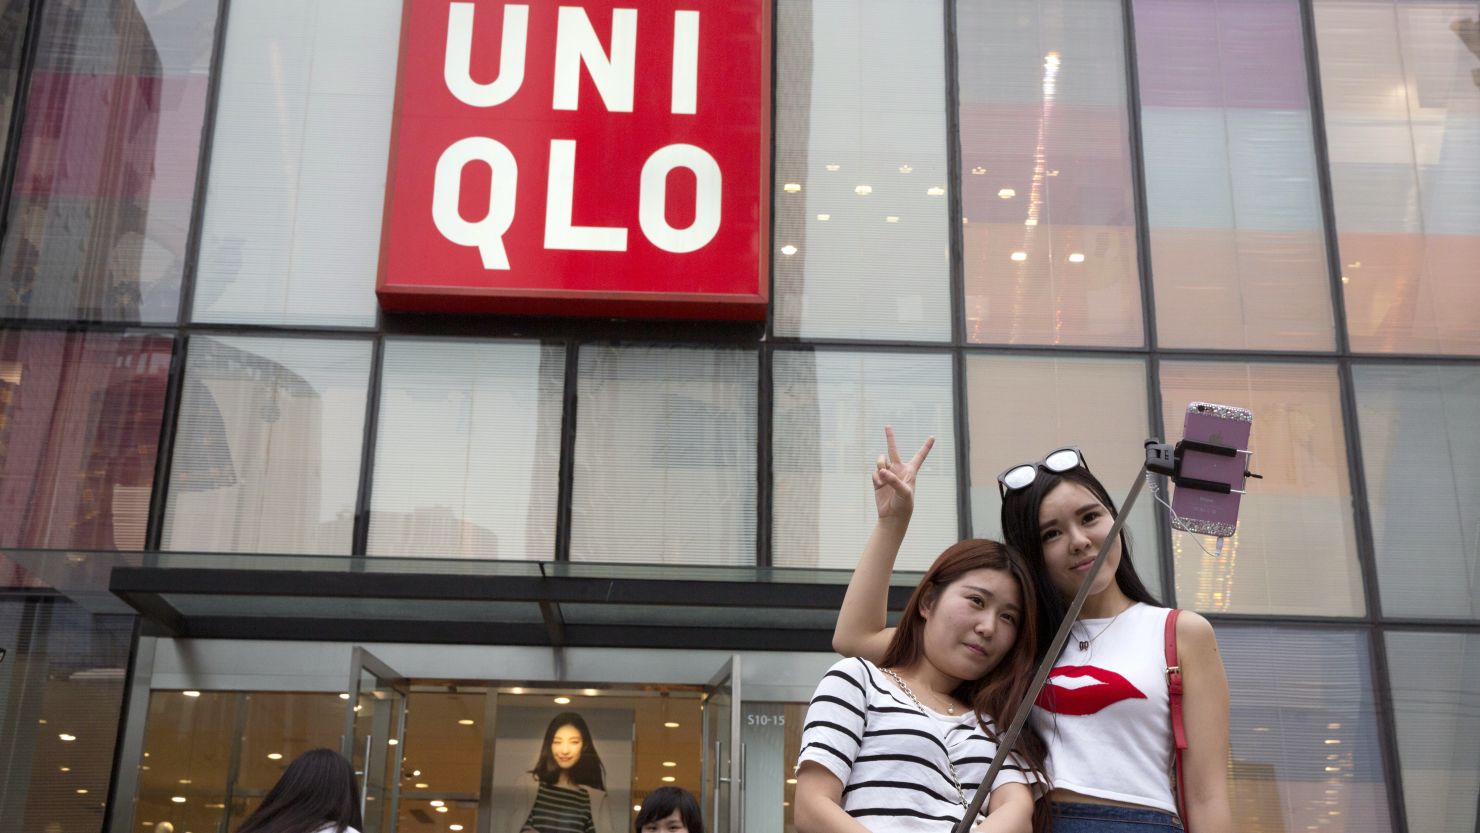 Chinese Police Lady Sex - China police detain Uniqlo sex video suspects | CNN